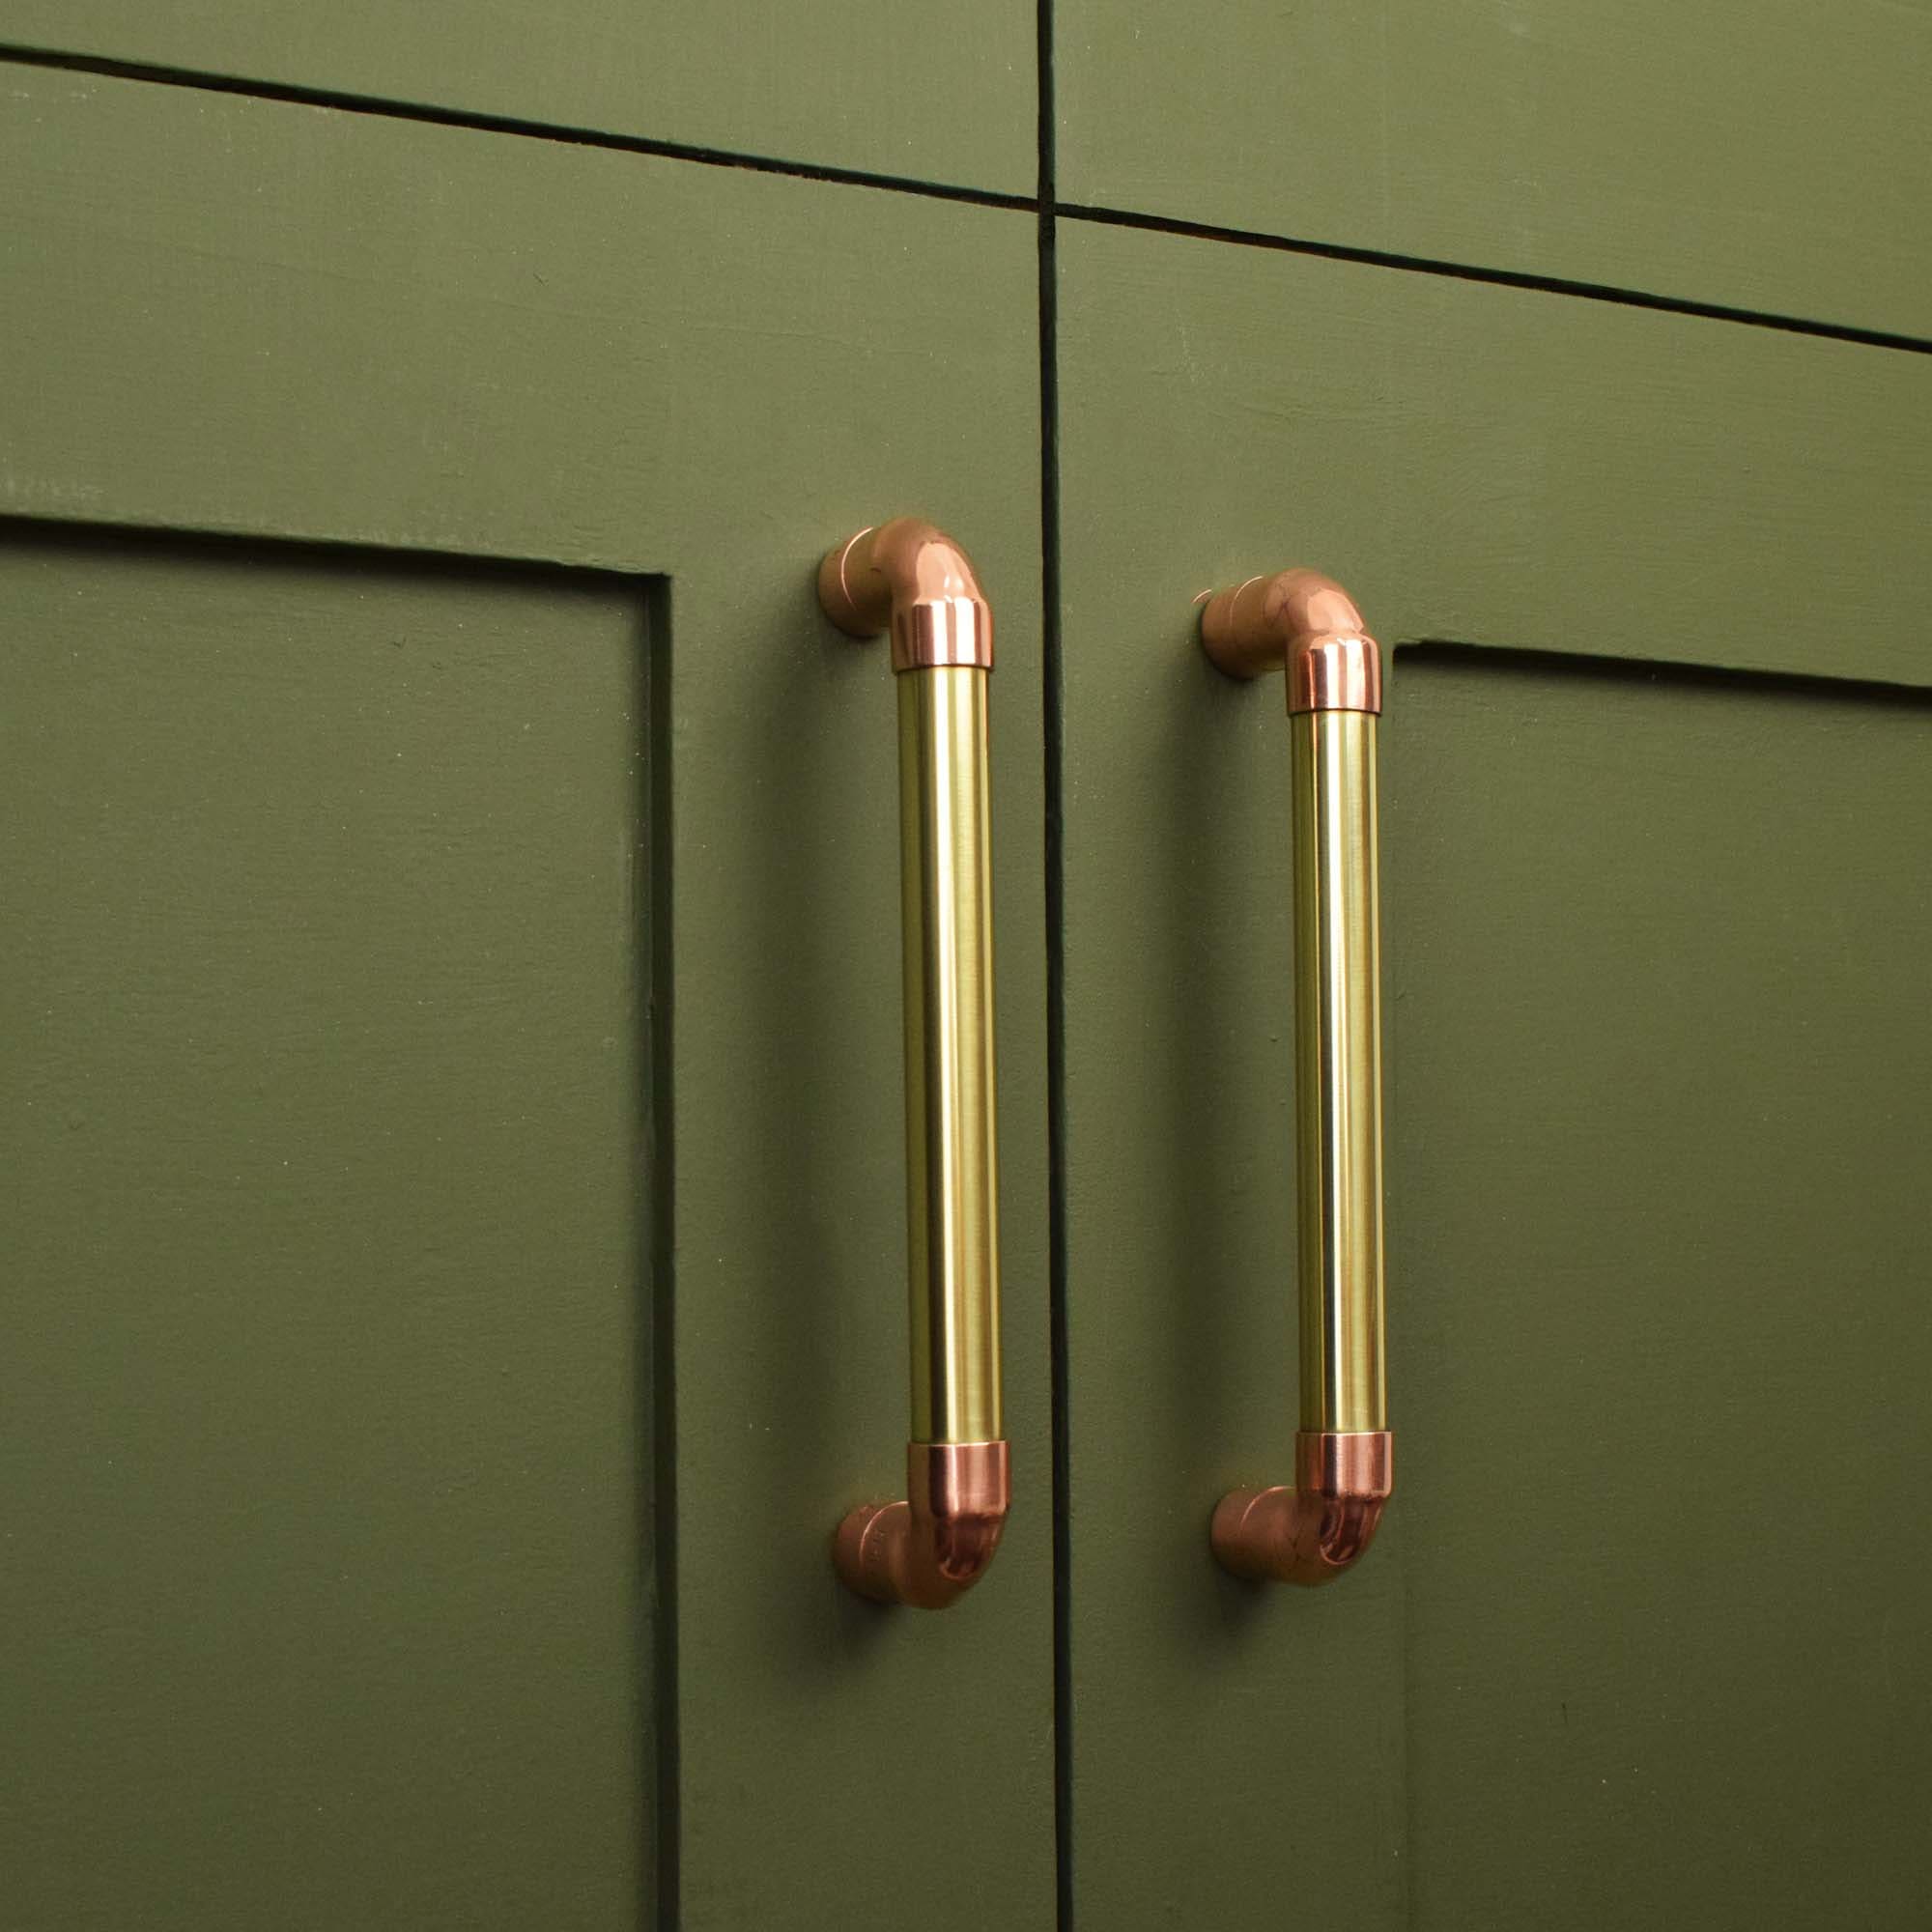 Brass U-Pull Handle with Copper Detail - On Green Cabinet